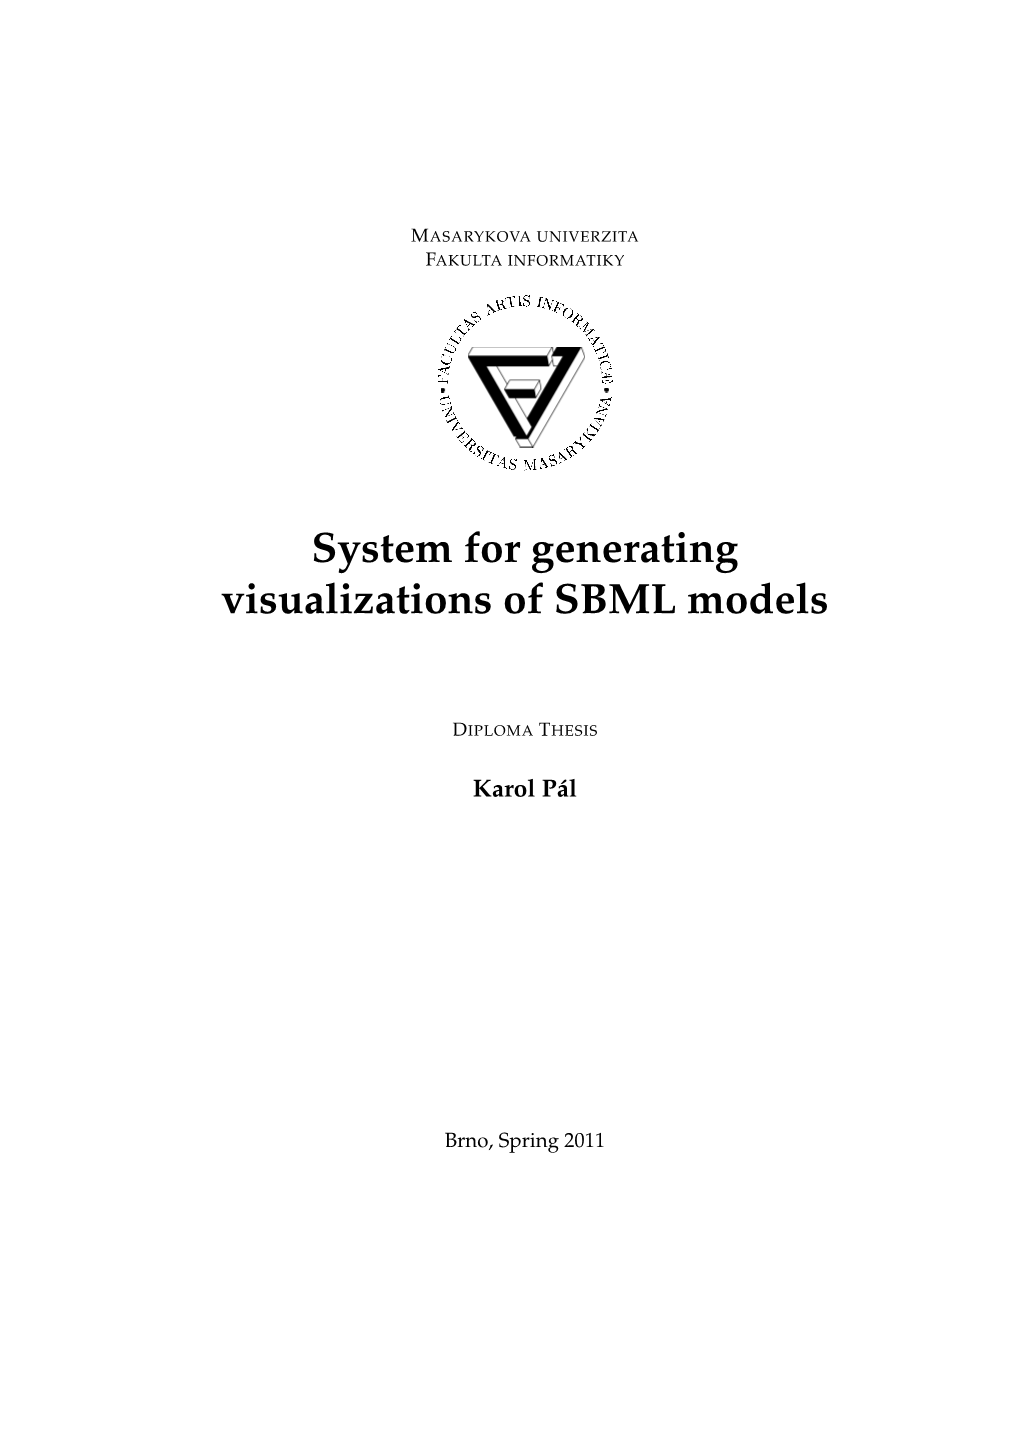 System for Generating Visualizations of SBML Models